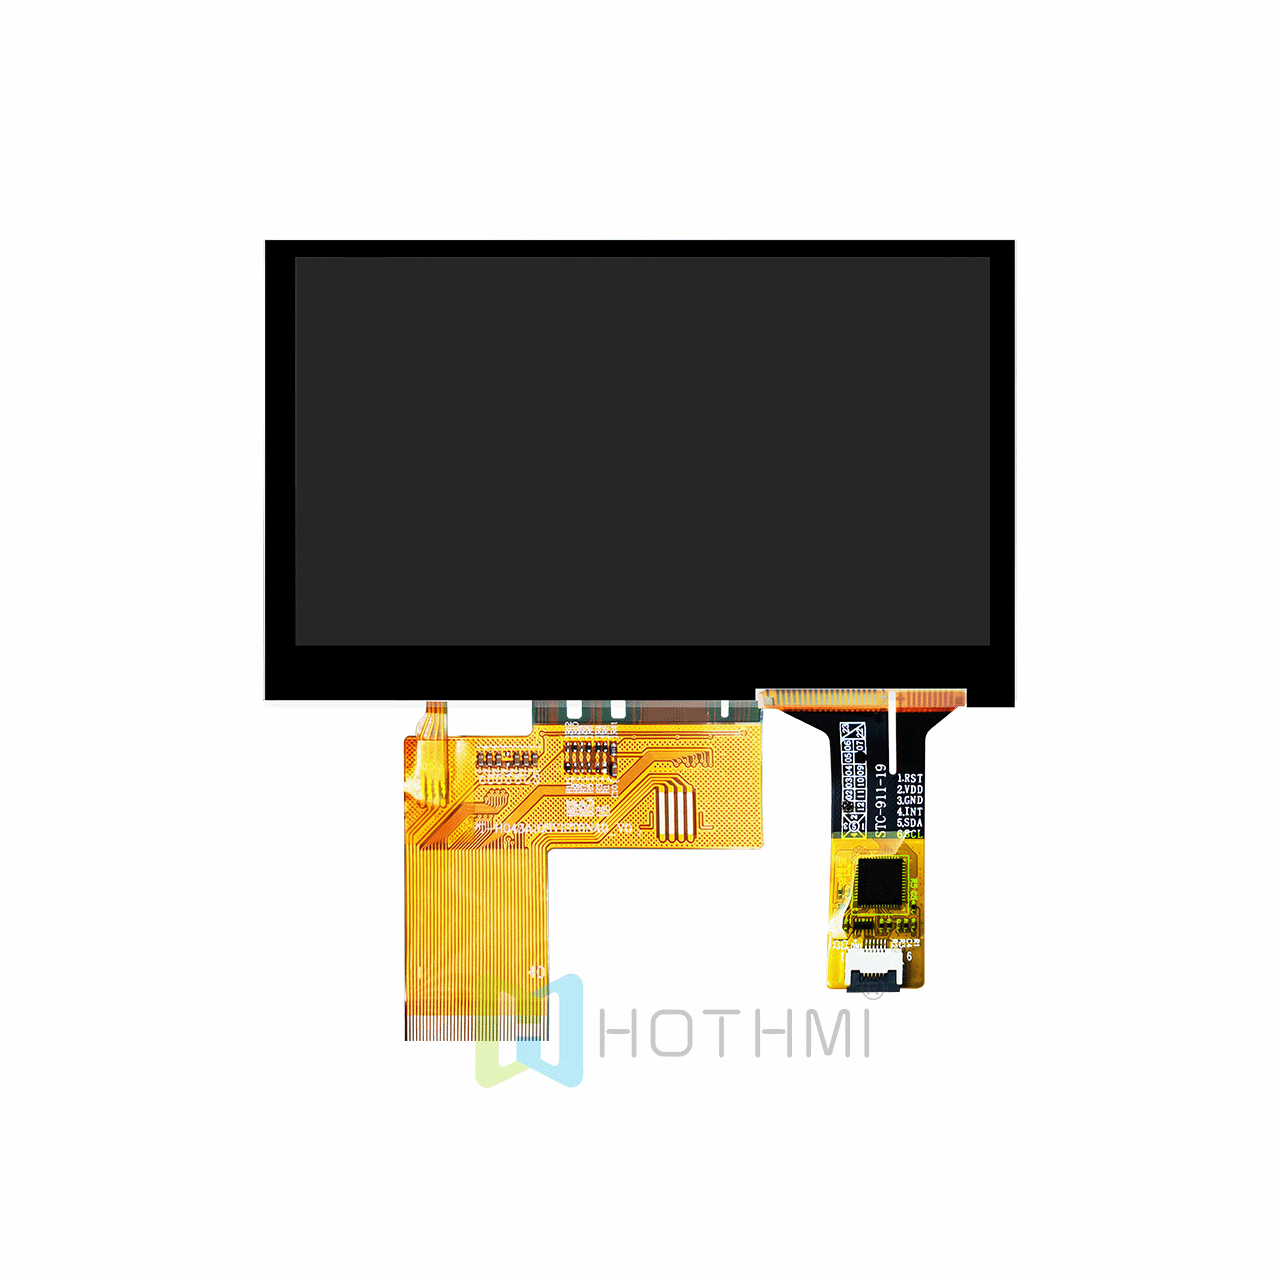 4.3-inch TFT LCD display module capacitive touch GT911 800x480 dot matrix wide temperature IPS full angle sunlight readable TTL ST7262 compatible with STM32/RK